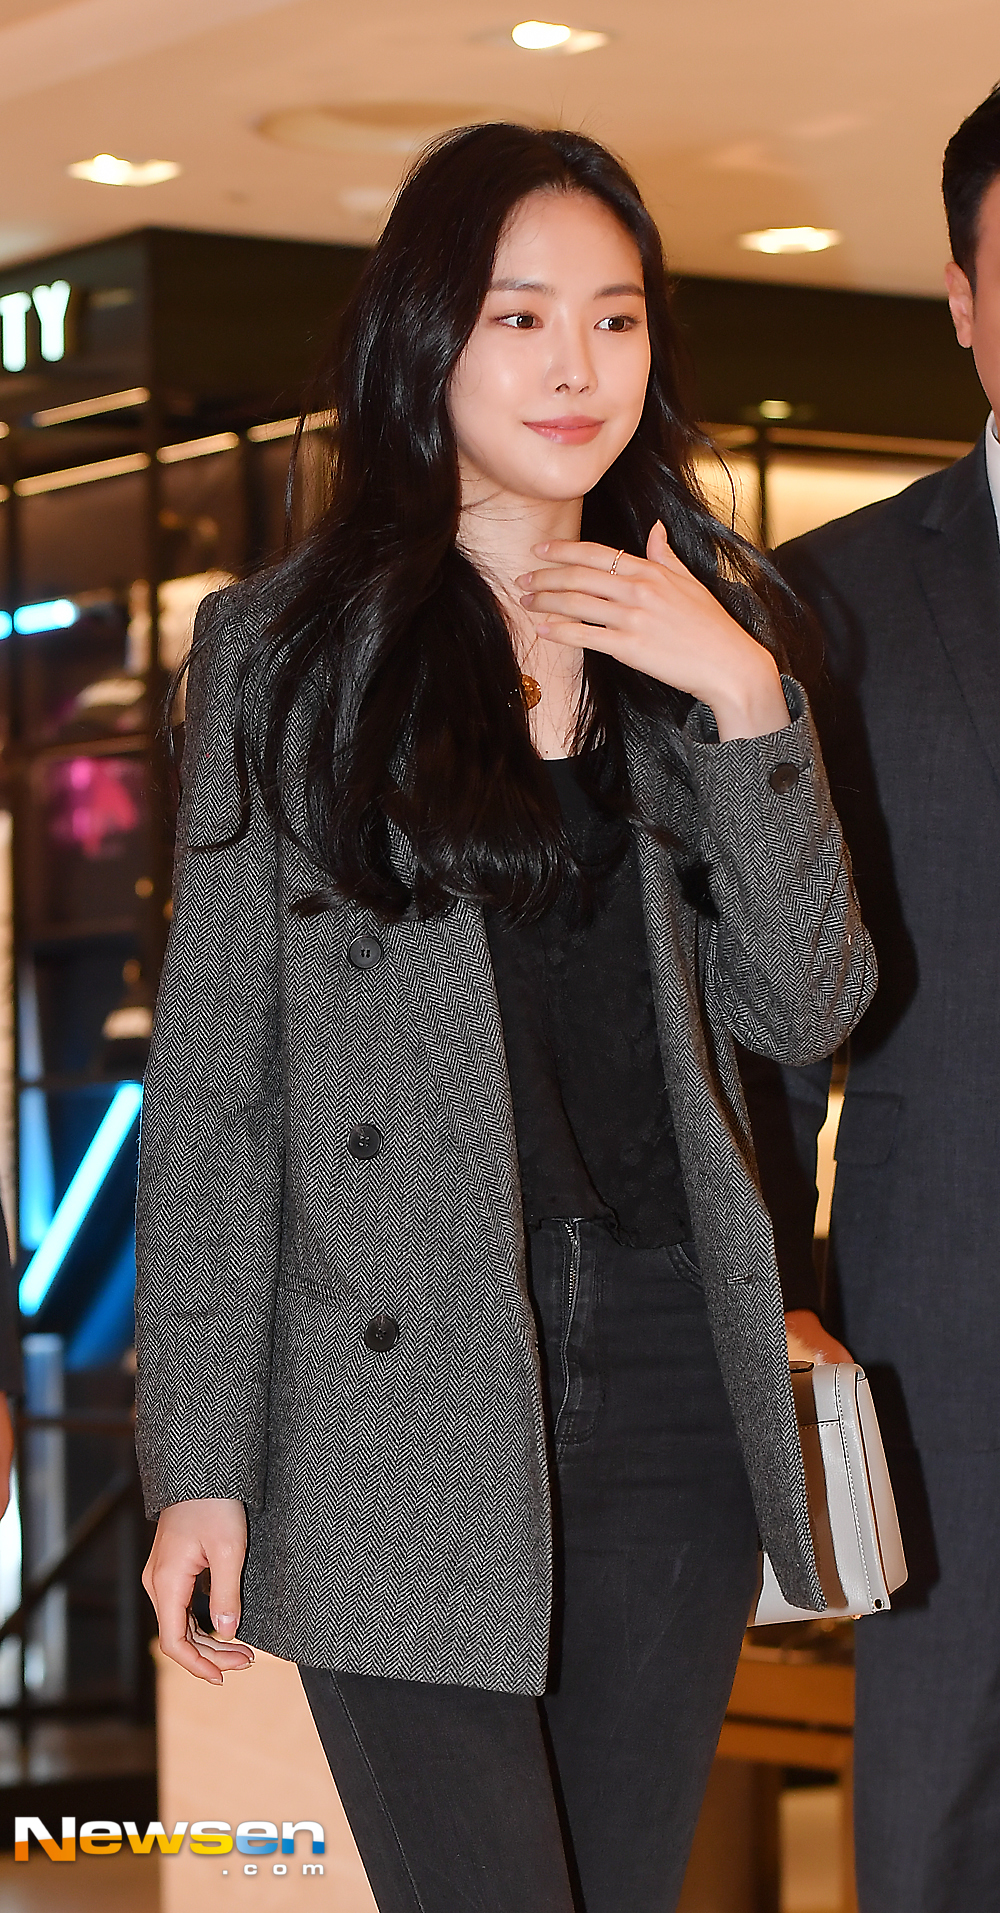 Apink Son Na-eun attended a parent brand photo call event held at the Lotte Department Store in Jung-gu, Seoul on the afternoon of October 10Son Na-eun is entering the event hall on the day.expressiveness